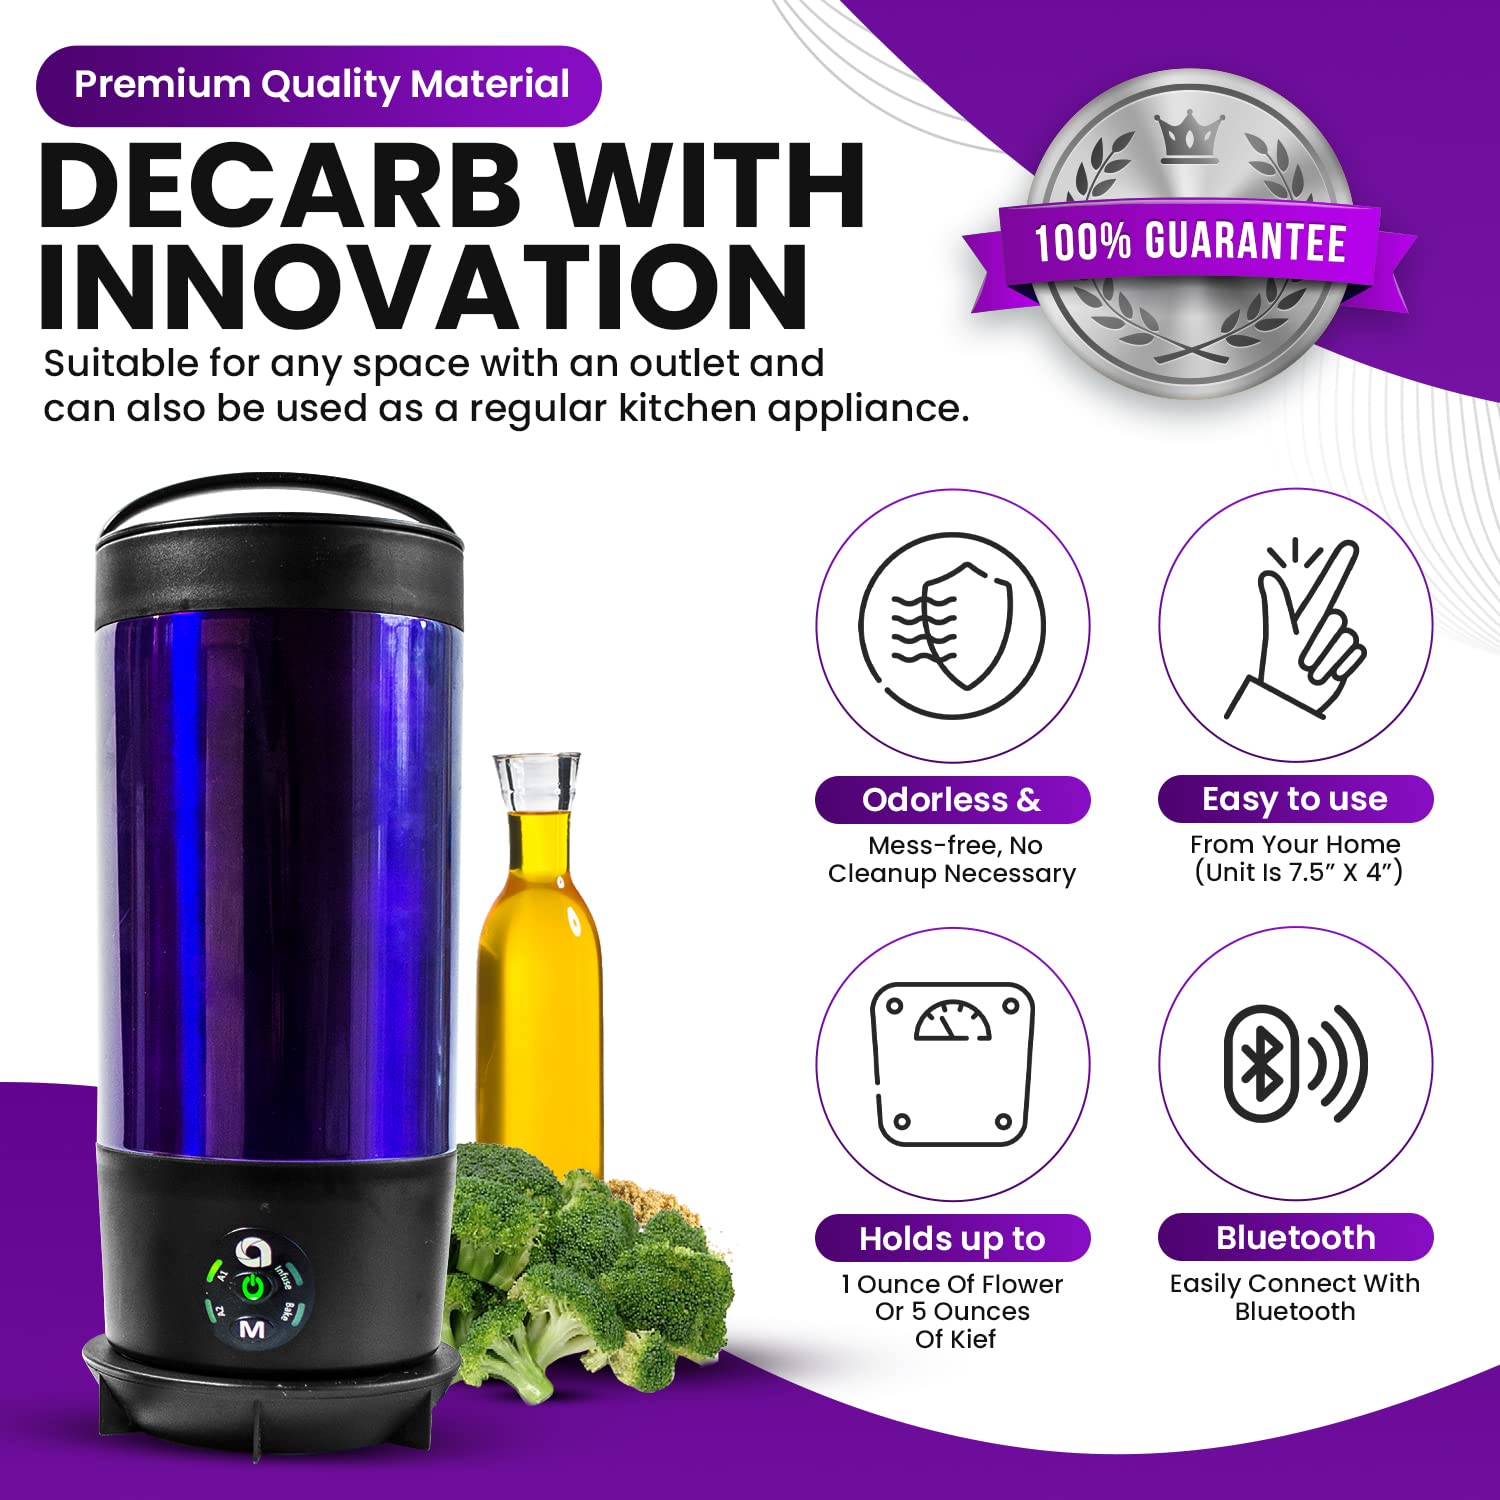 Ardent FX Decarboxylator 110V With Bluetooth Connectivity - 3 in 1 Portable Decarboxylation - Herbal & Oil Infuser Machine - Quick & Effortless Decarboxylation - Odorless - Use for Butter and Herbs